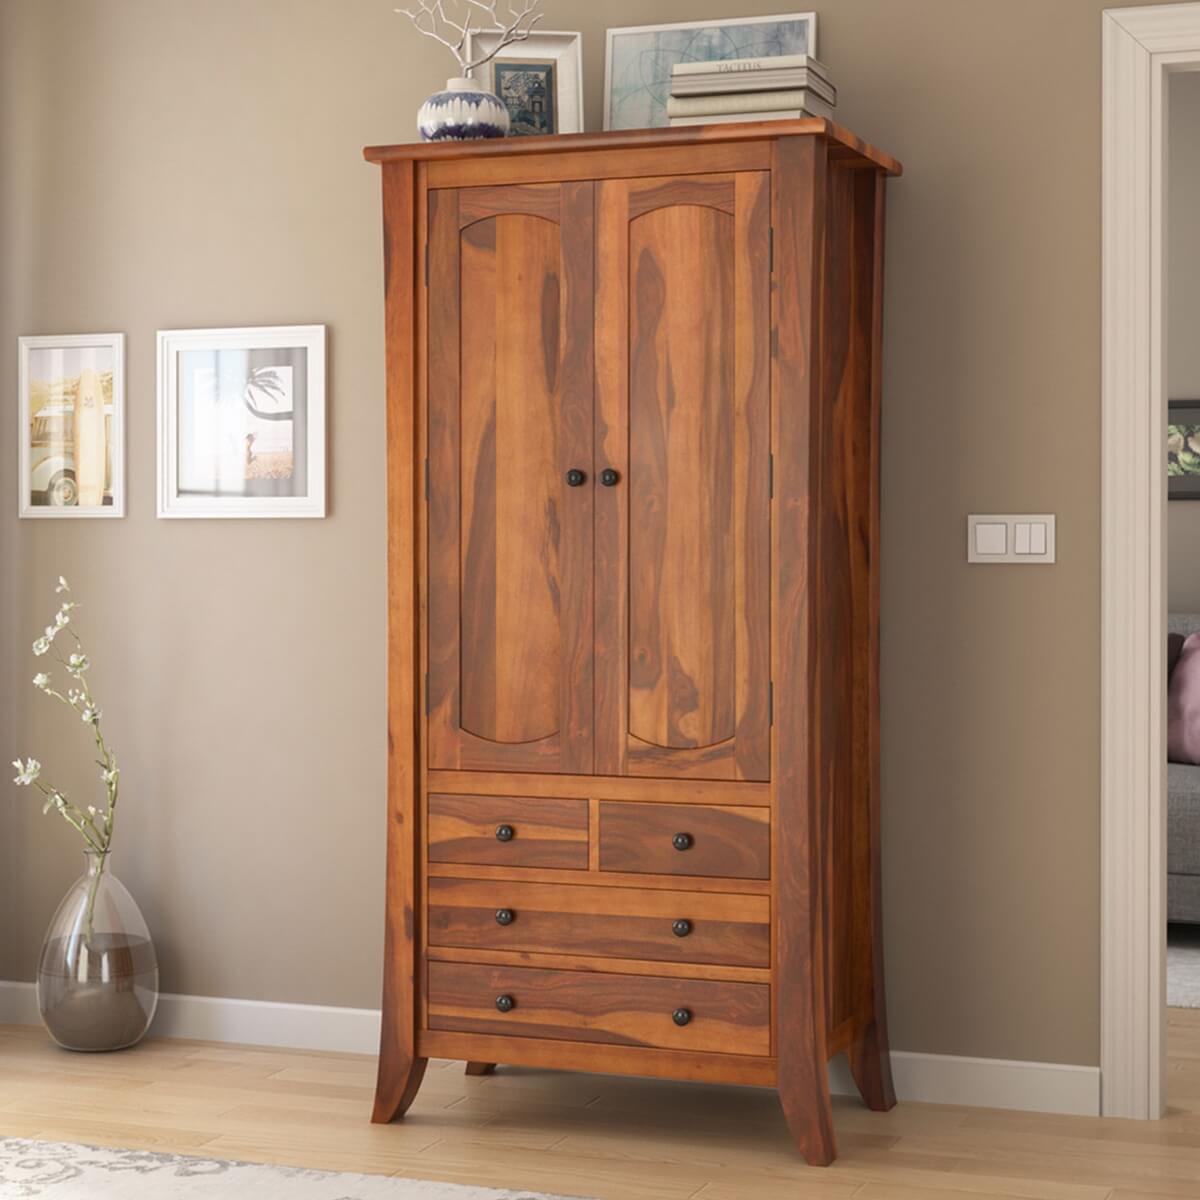 Georgia Modern Solid Wood Wardrobe Clothing Armoire Closet with 4 Drawers